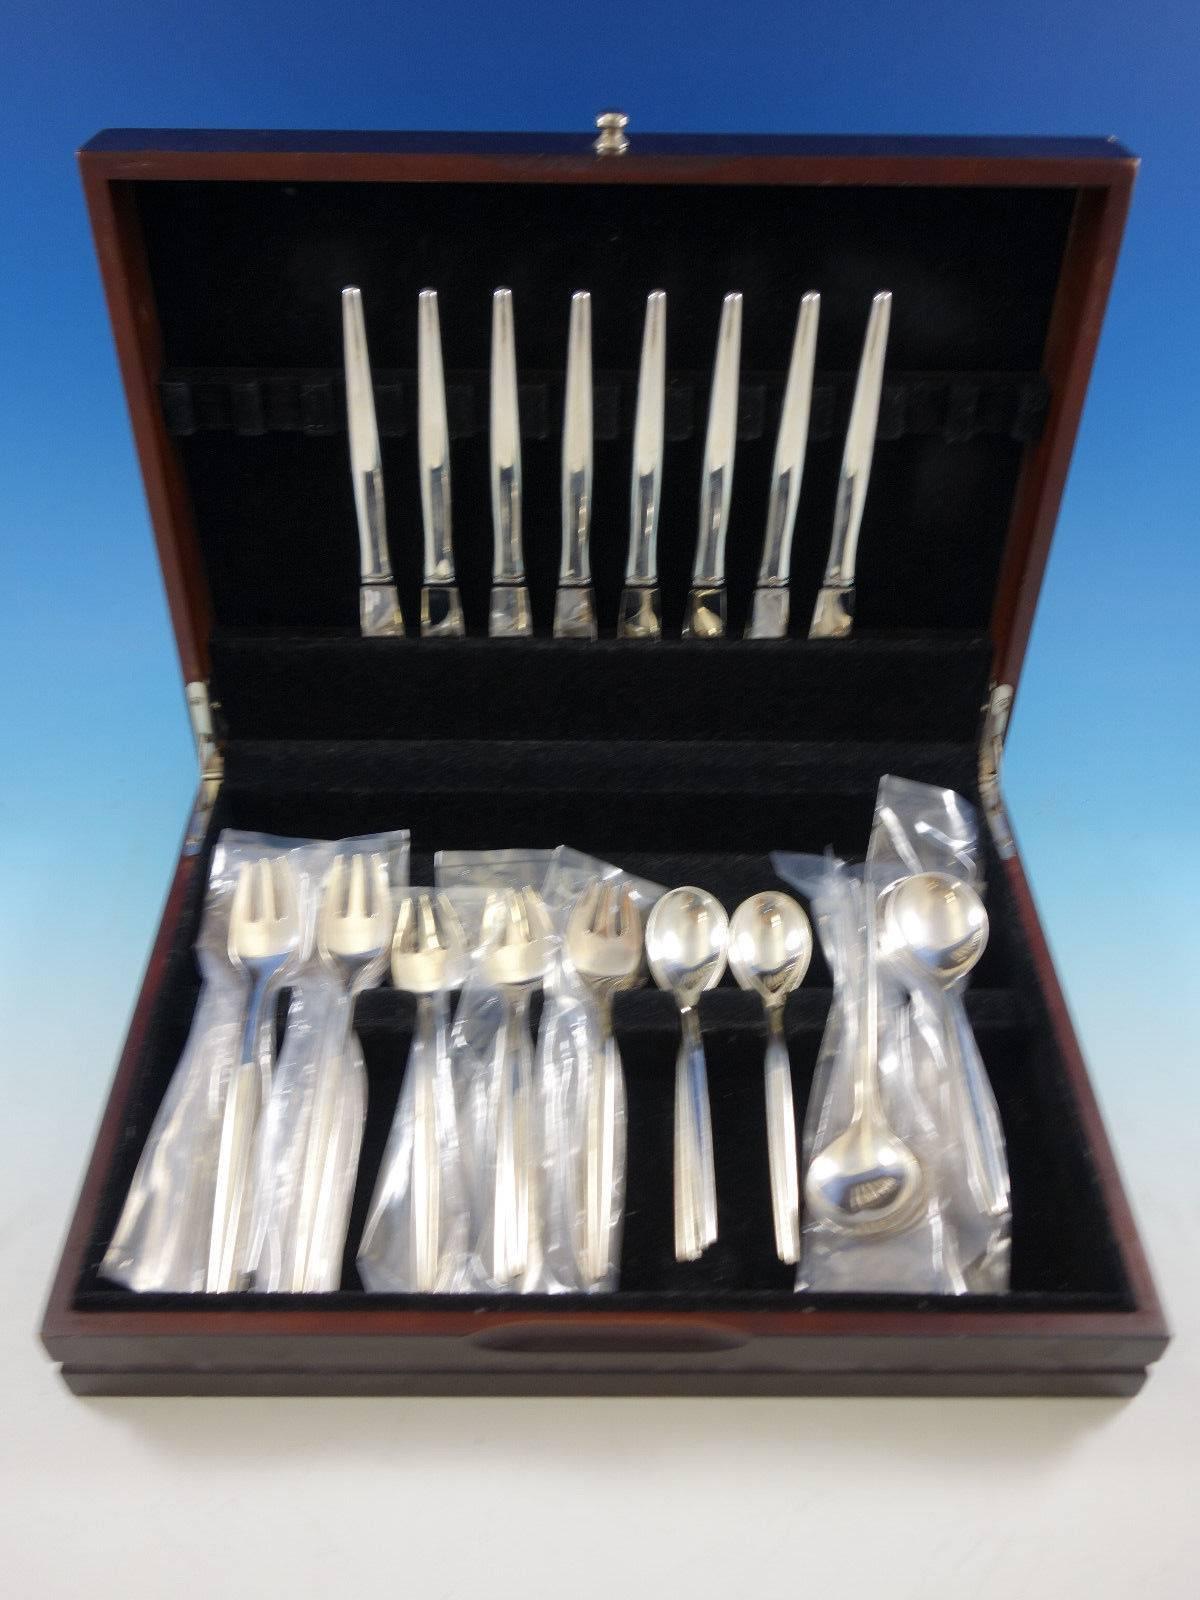 Mid-Century Modern Tulip by Michelsen Danish sterling silver flatware set, 40 pieces. This set includes: Eight knives, 8 1/2